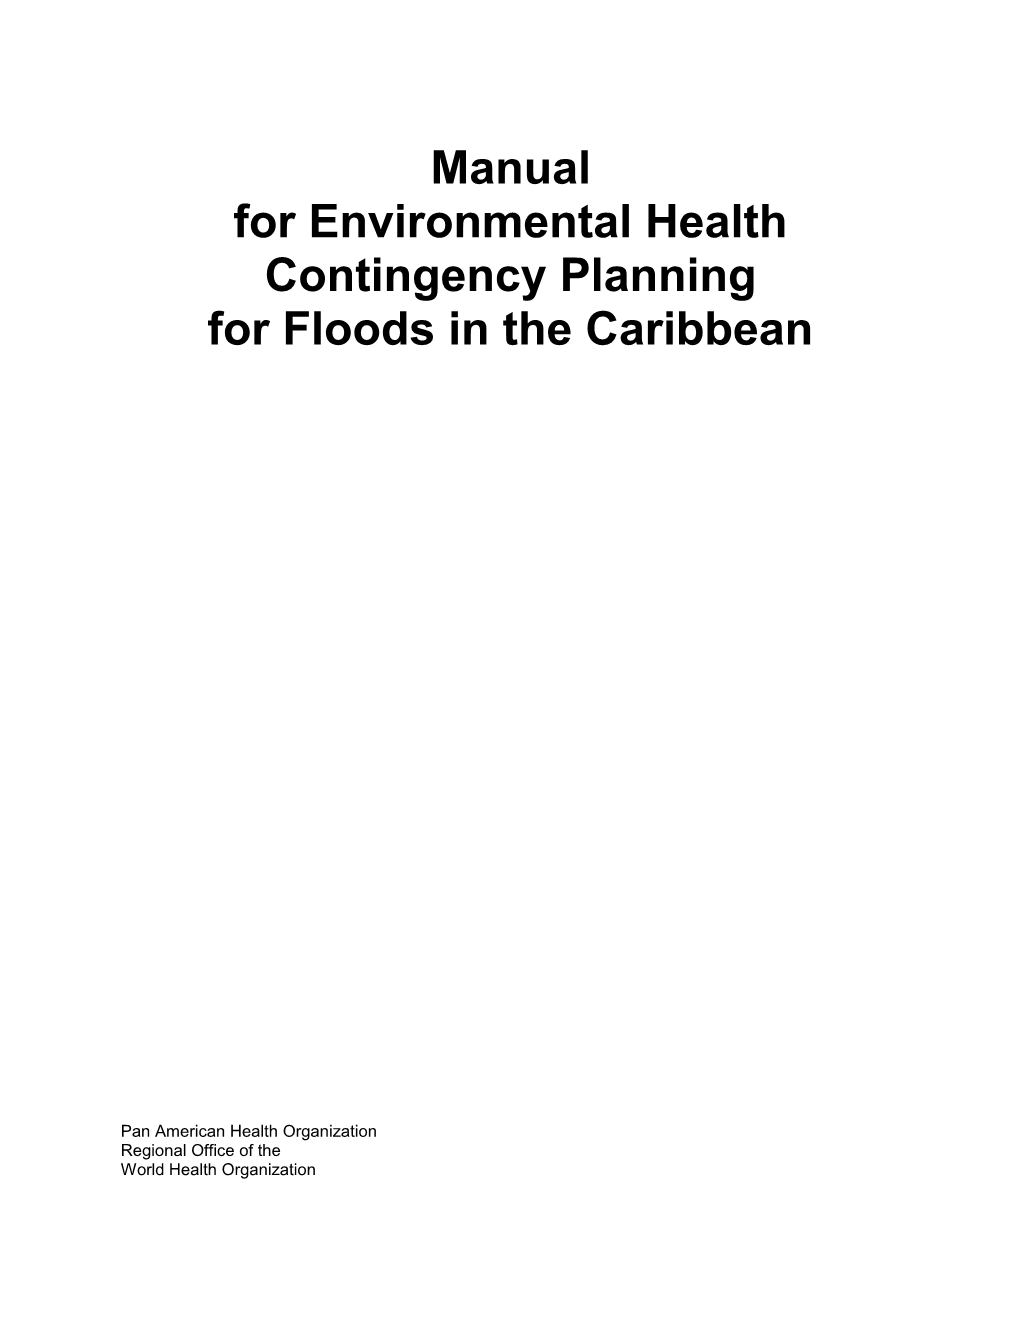 Environmental Health Contingency Planning for Floods in the Caribbean